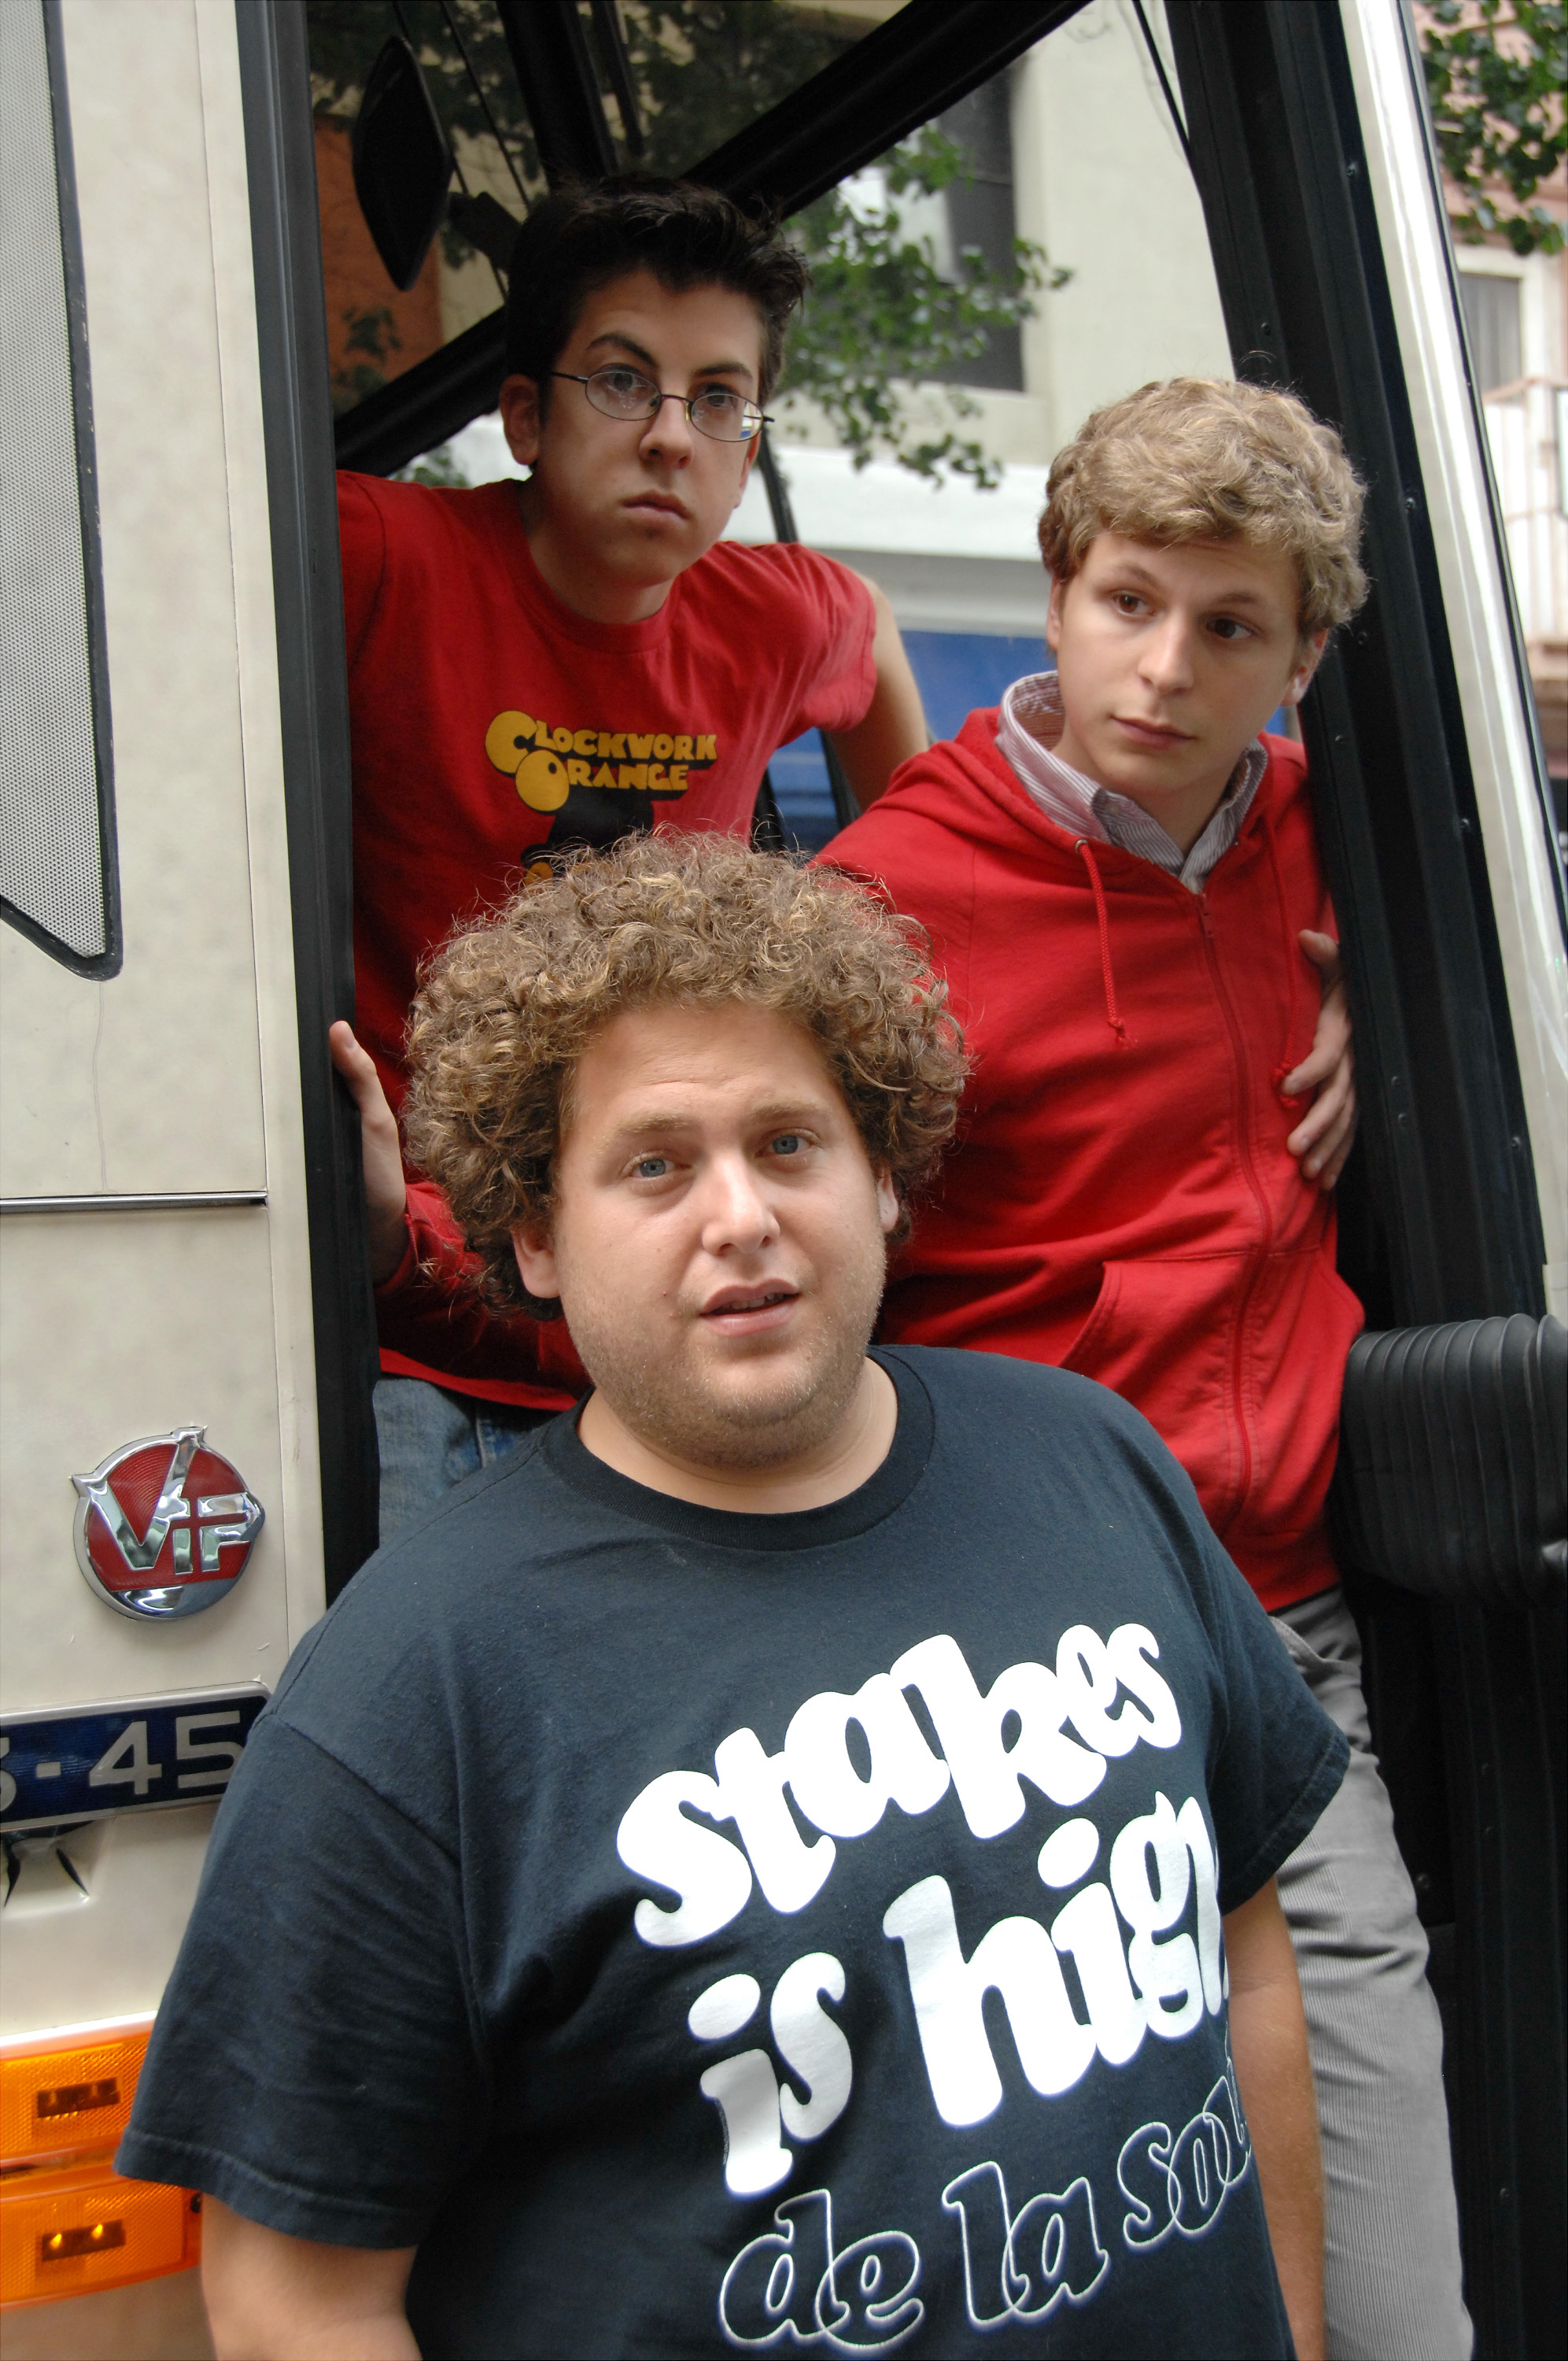 Christopher Mintz-Plasse, Michael Cera and Jonah Hill (clockwise from top) are pictured as they walk out of a studio bus in front of Bowlmor Lanes where they're promoting their new movie "Superbad" on August 27, 2007 | Source: Getty Images